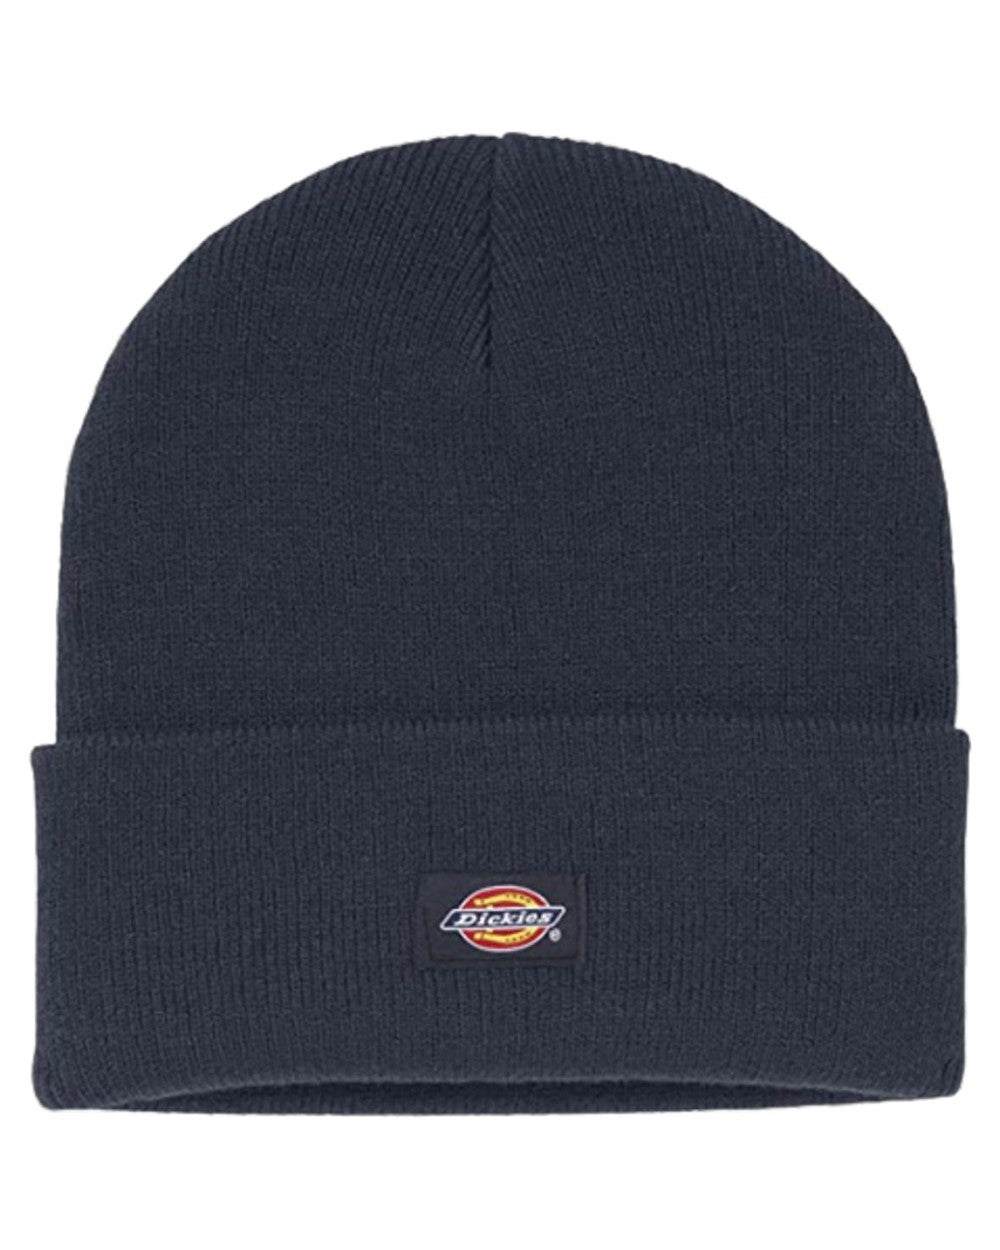 Navy coloured Dickies Acrylic Cuffed Beanie on white background 